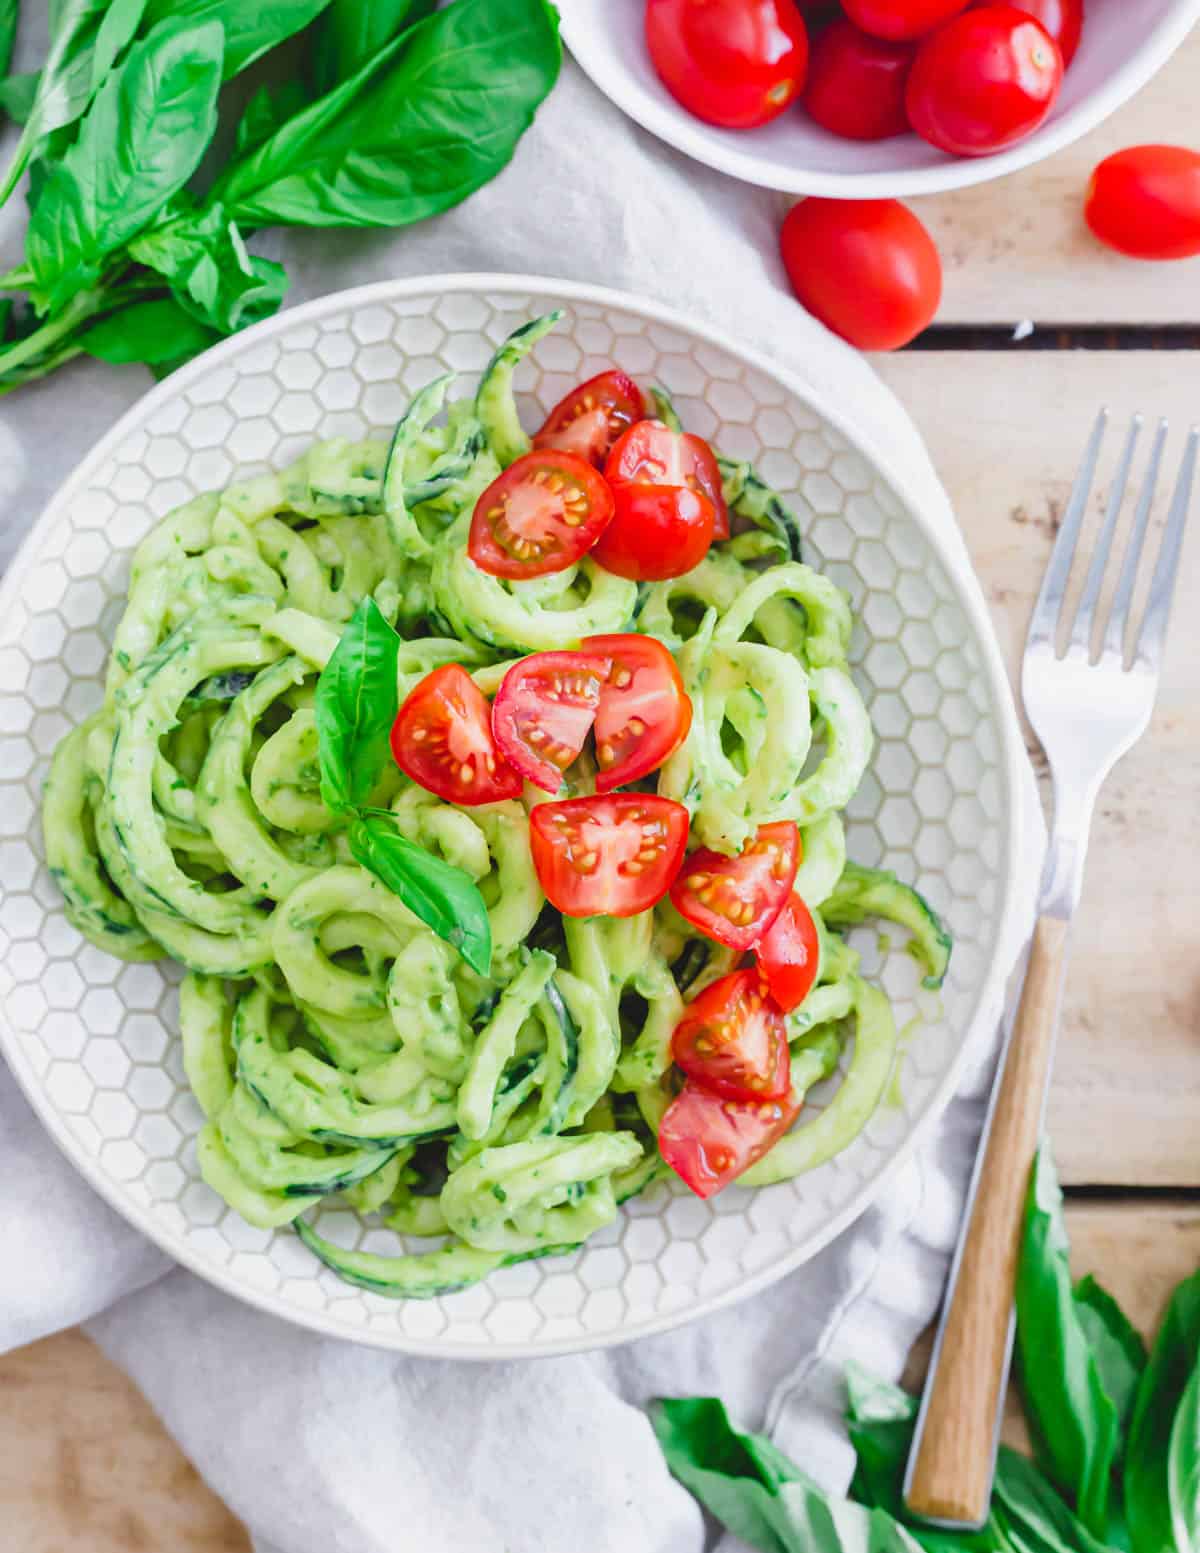 Zucchini noodle pasta with creamy avocado sauce and cherry tomatoes in a bowl.